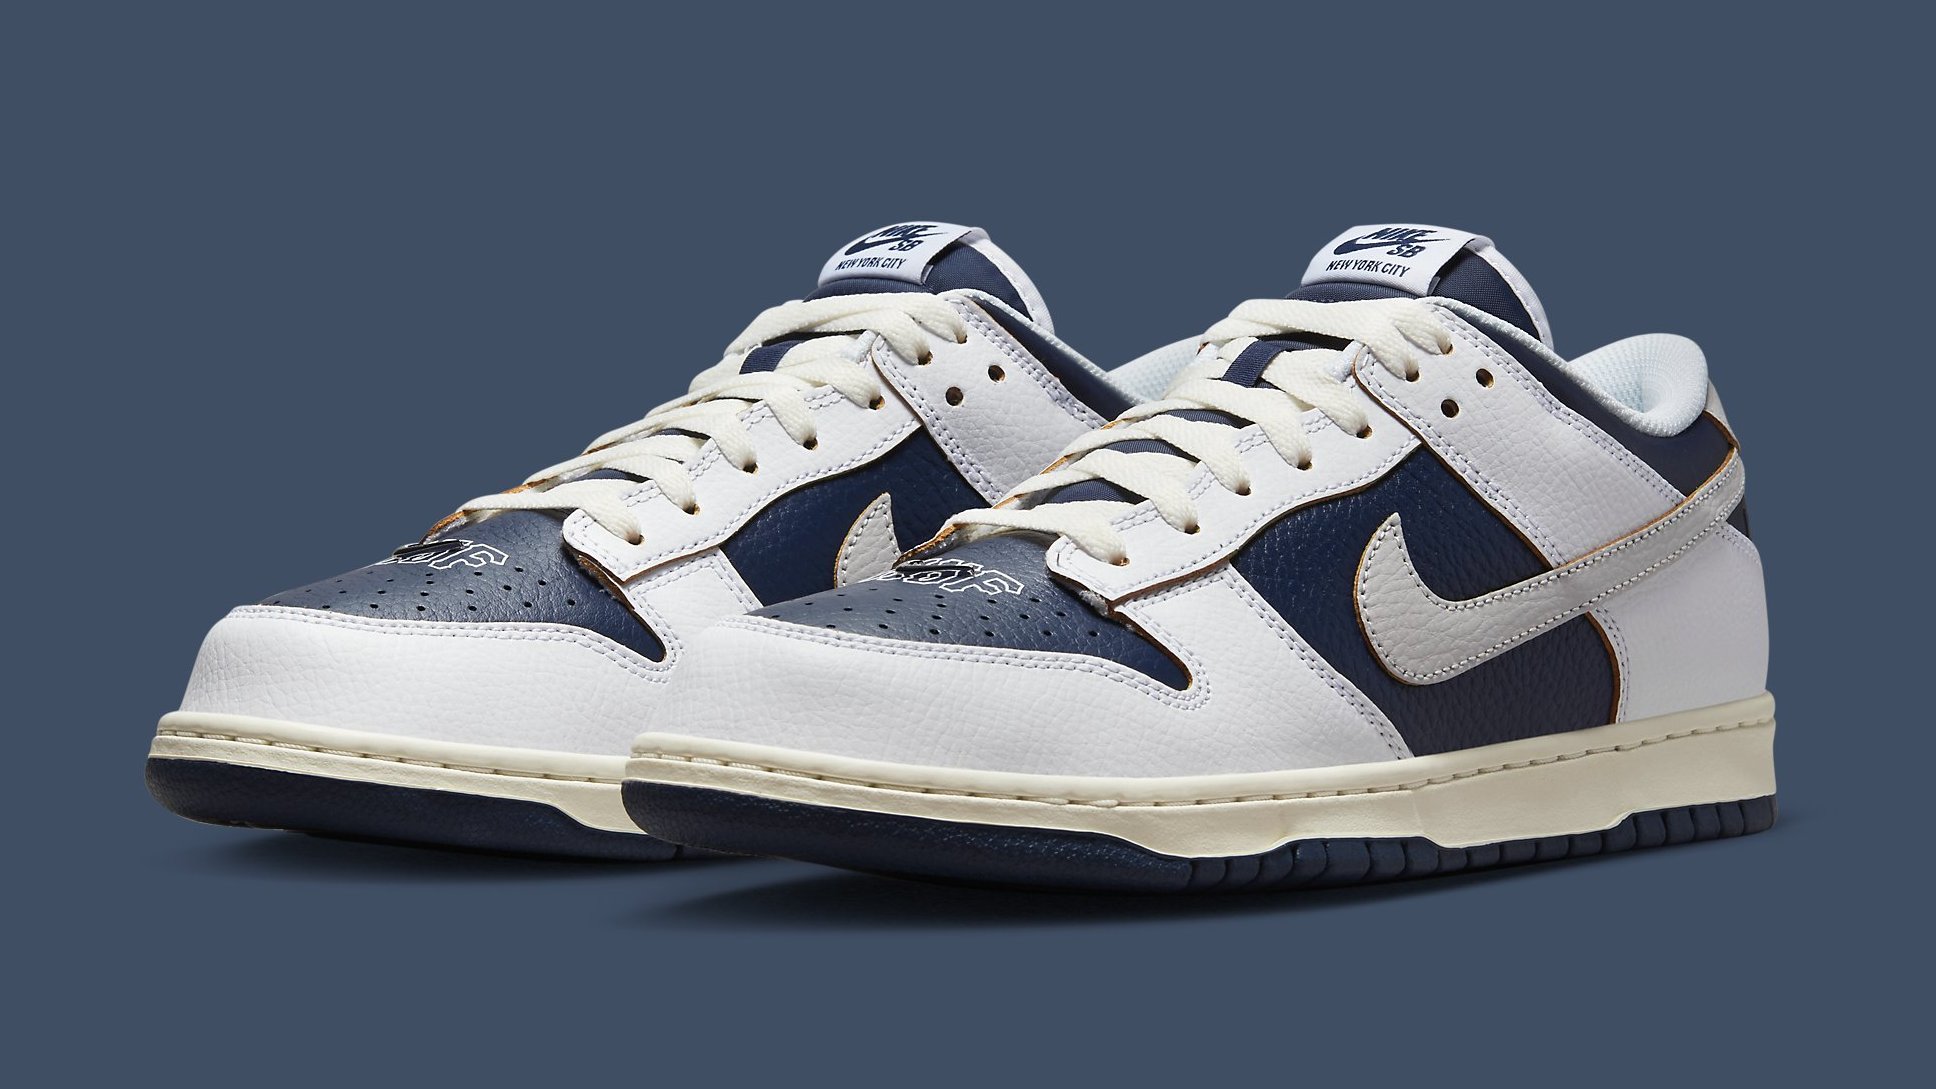 HUF blue nike skate shoes x Nike SB Dunk Low Collab 20th Anniversary Release Date FD8775